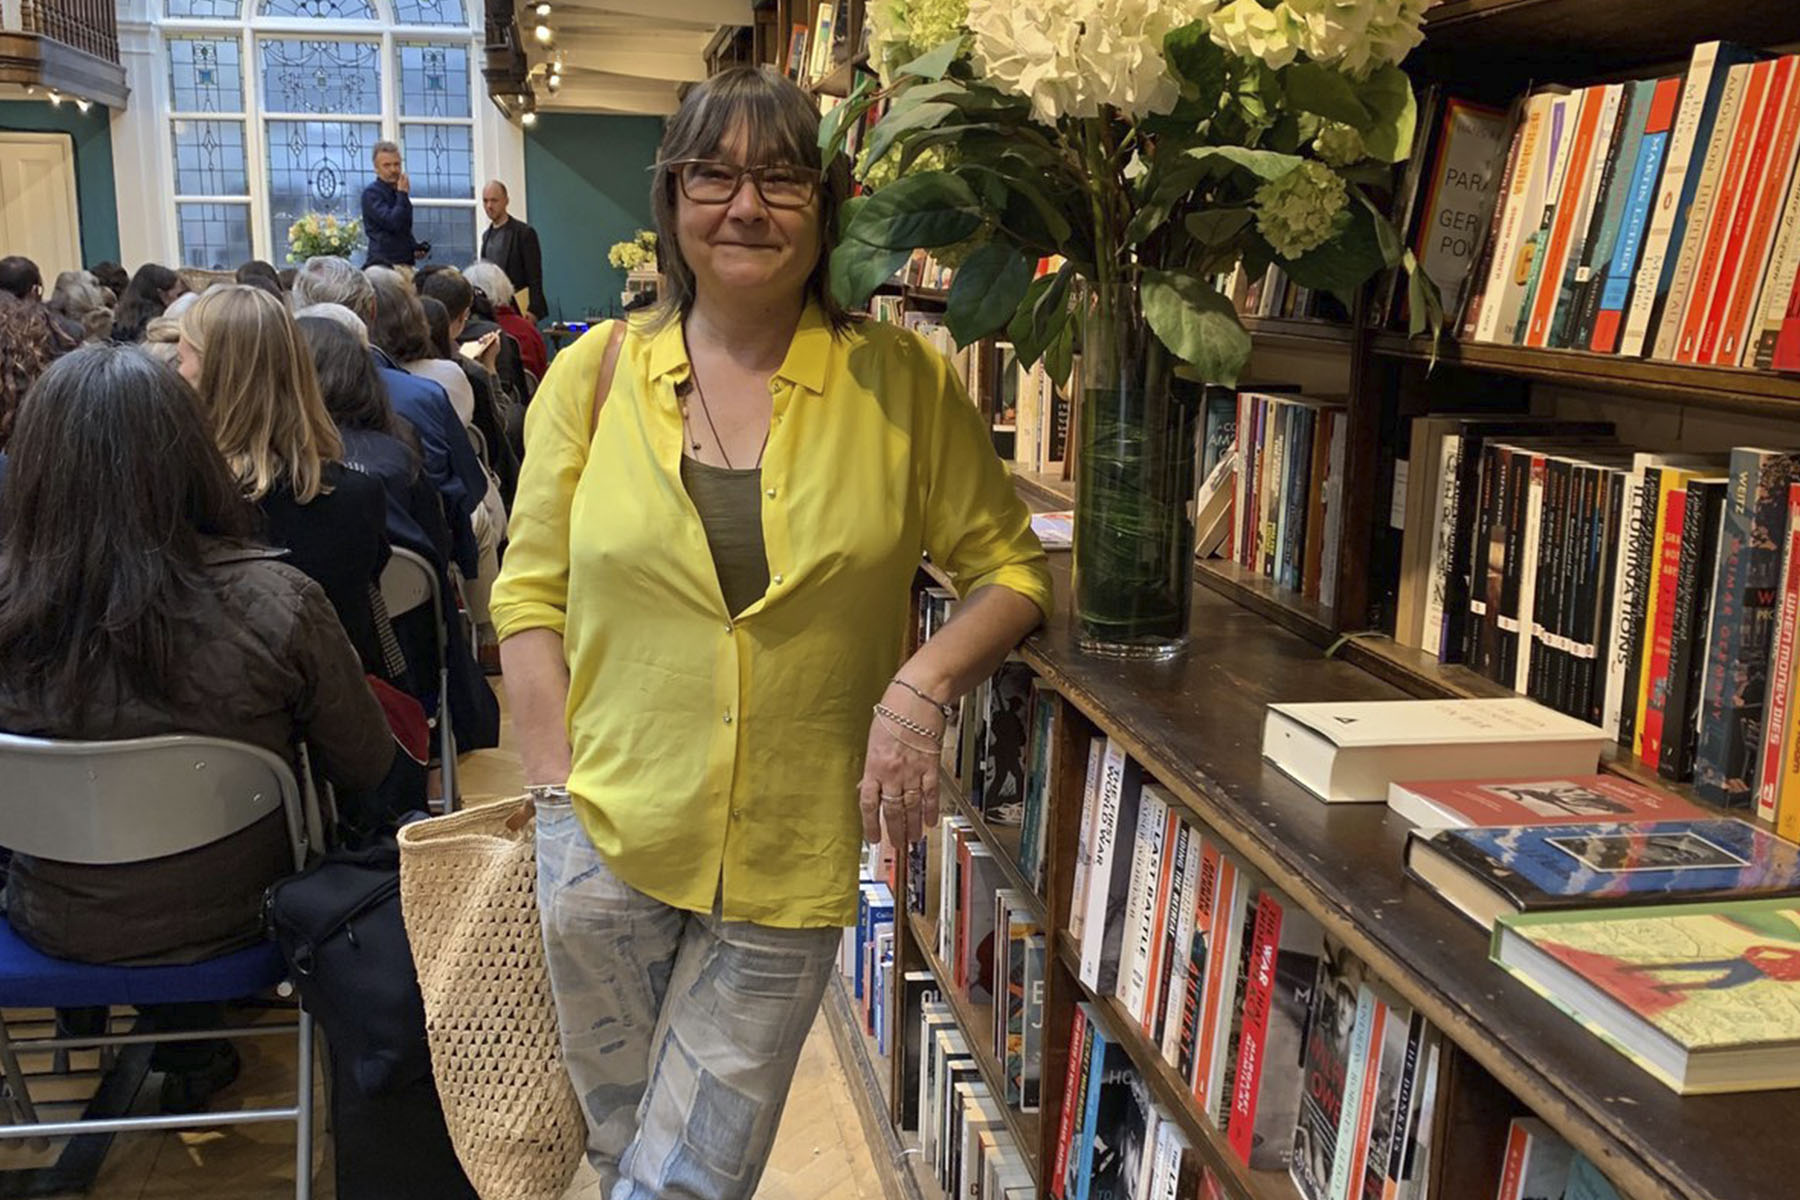 Ali Smith at the Spring preview event